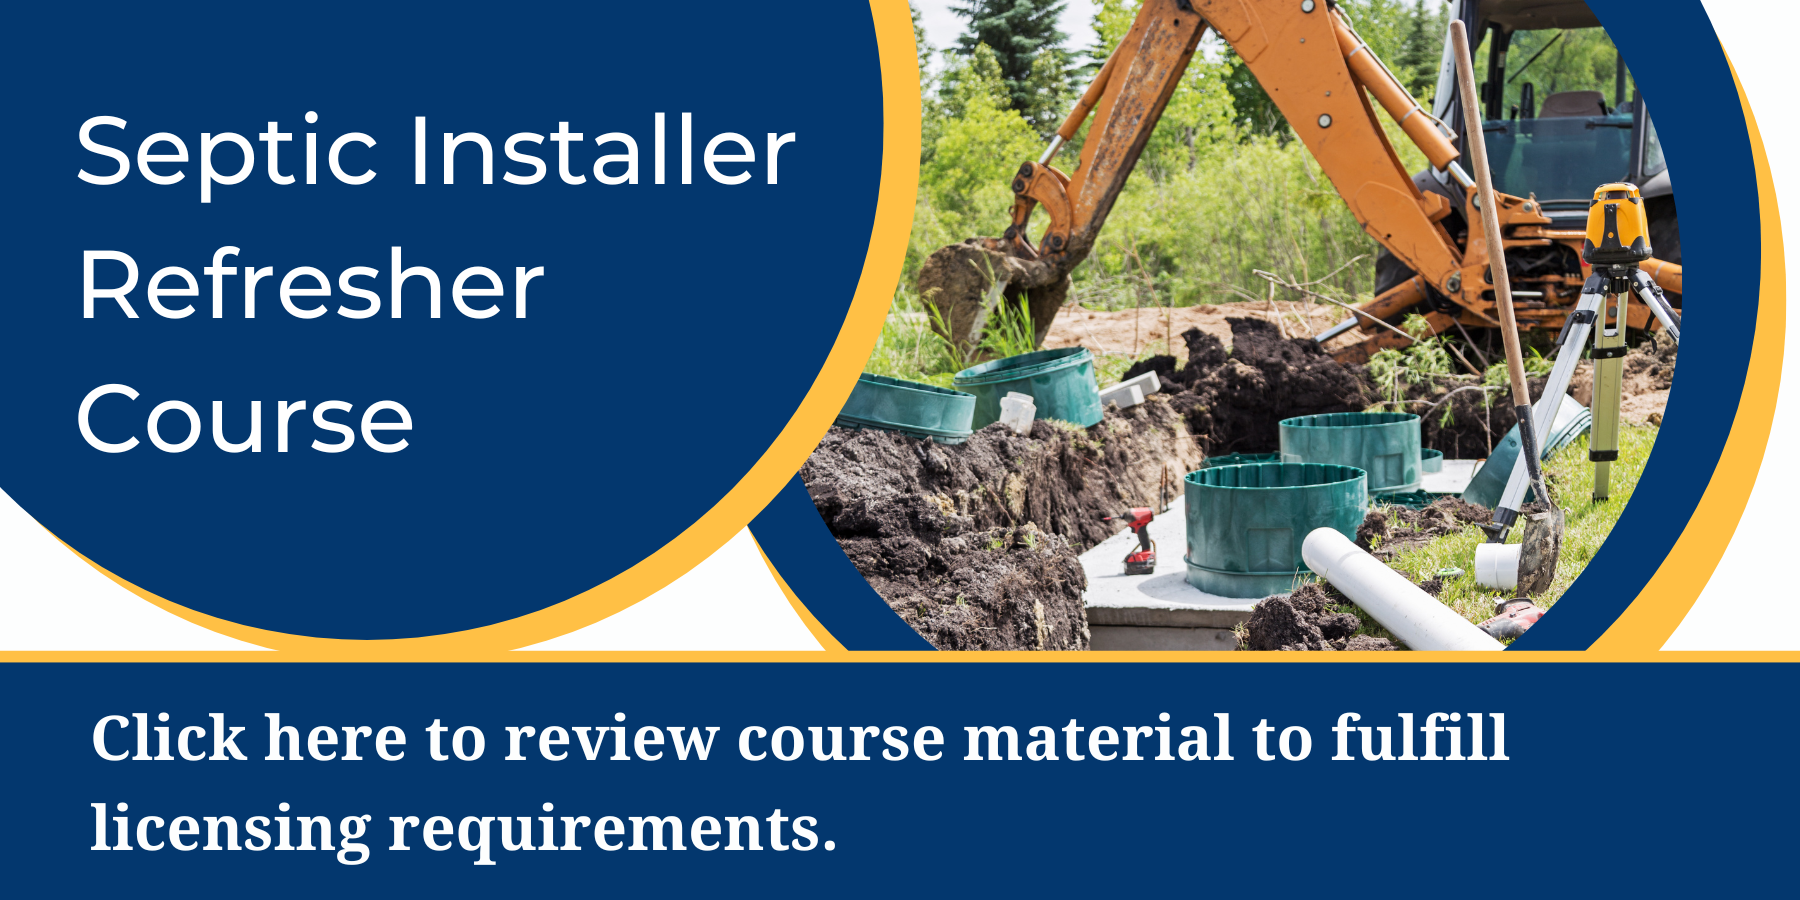 Banner for the Installer's refresher course